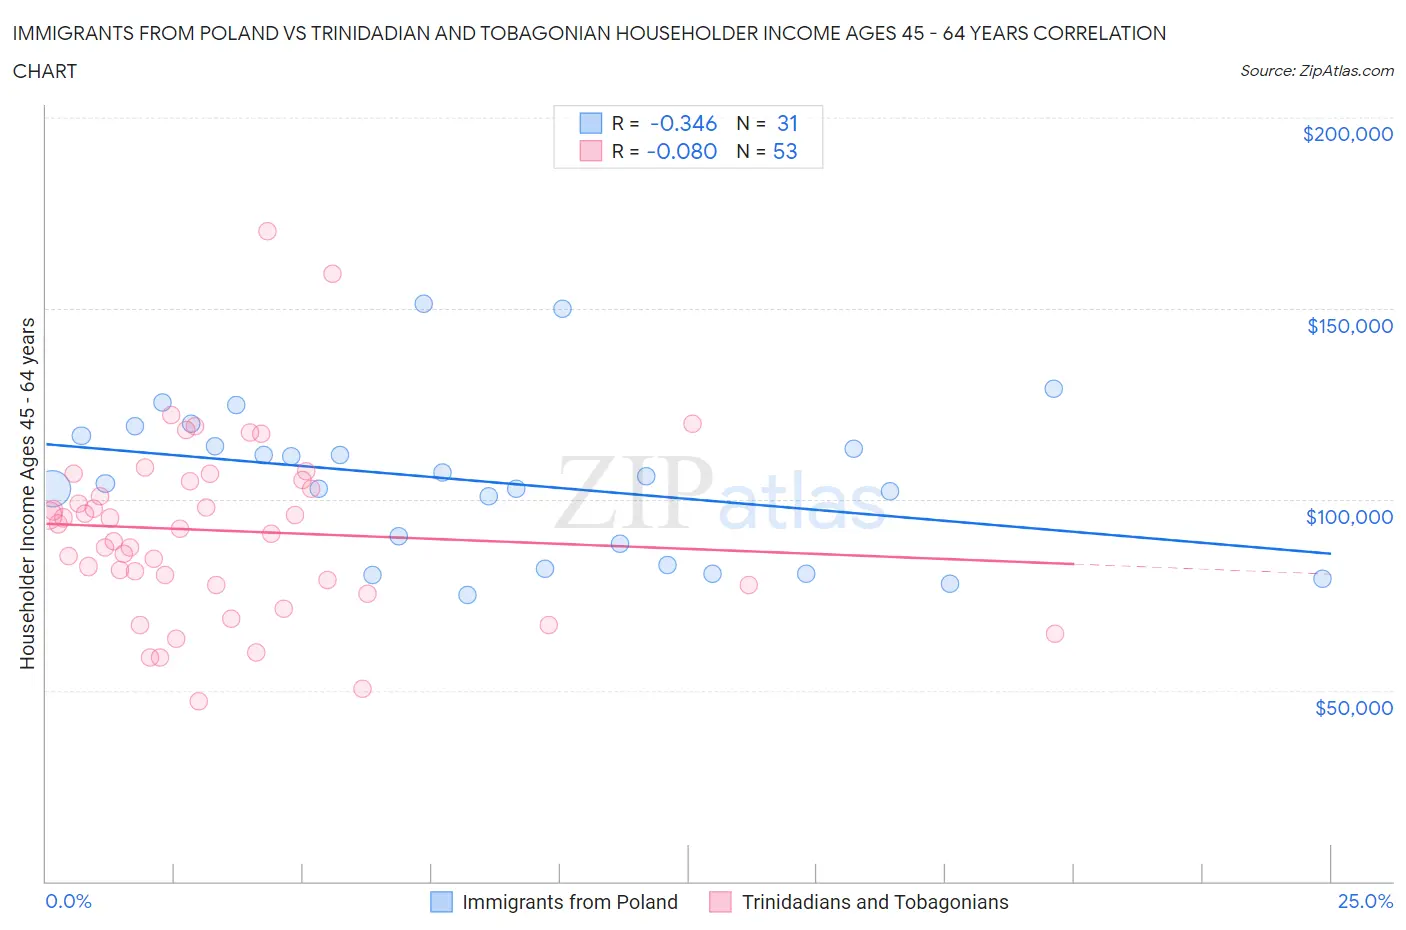 Immigrants from Poland vs Trinidadian and Tobagonian Householder Income Ages 45 - 64 years